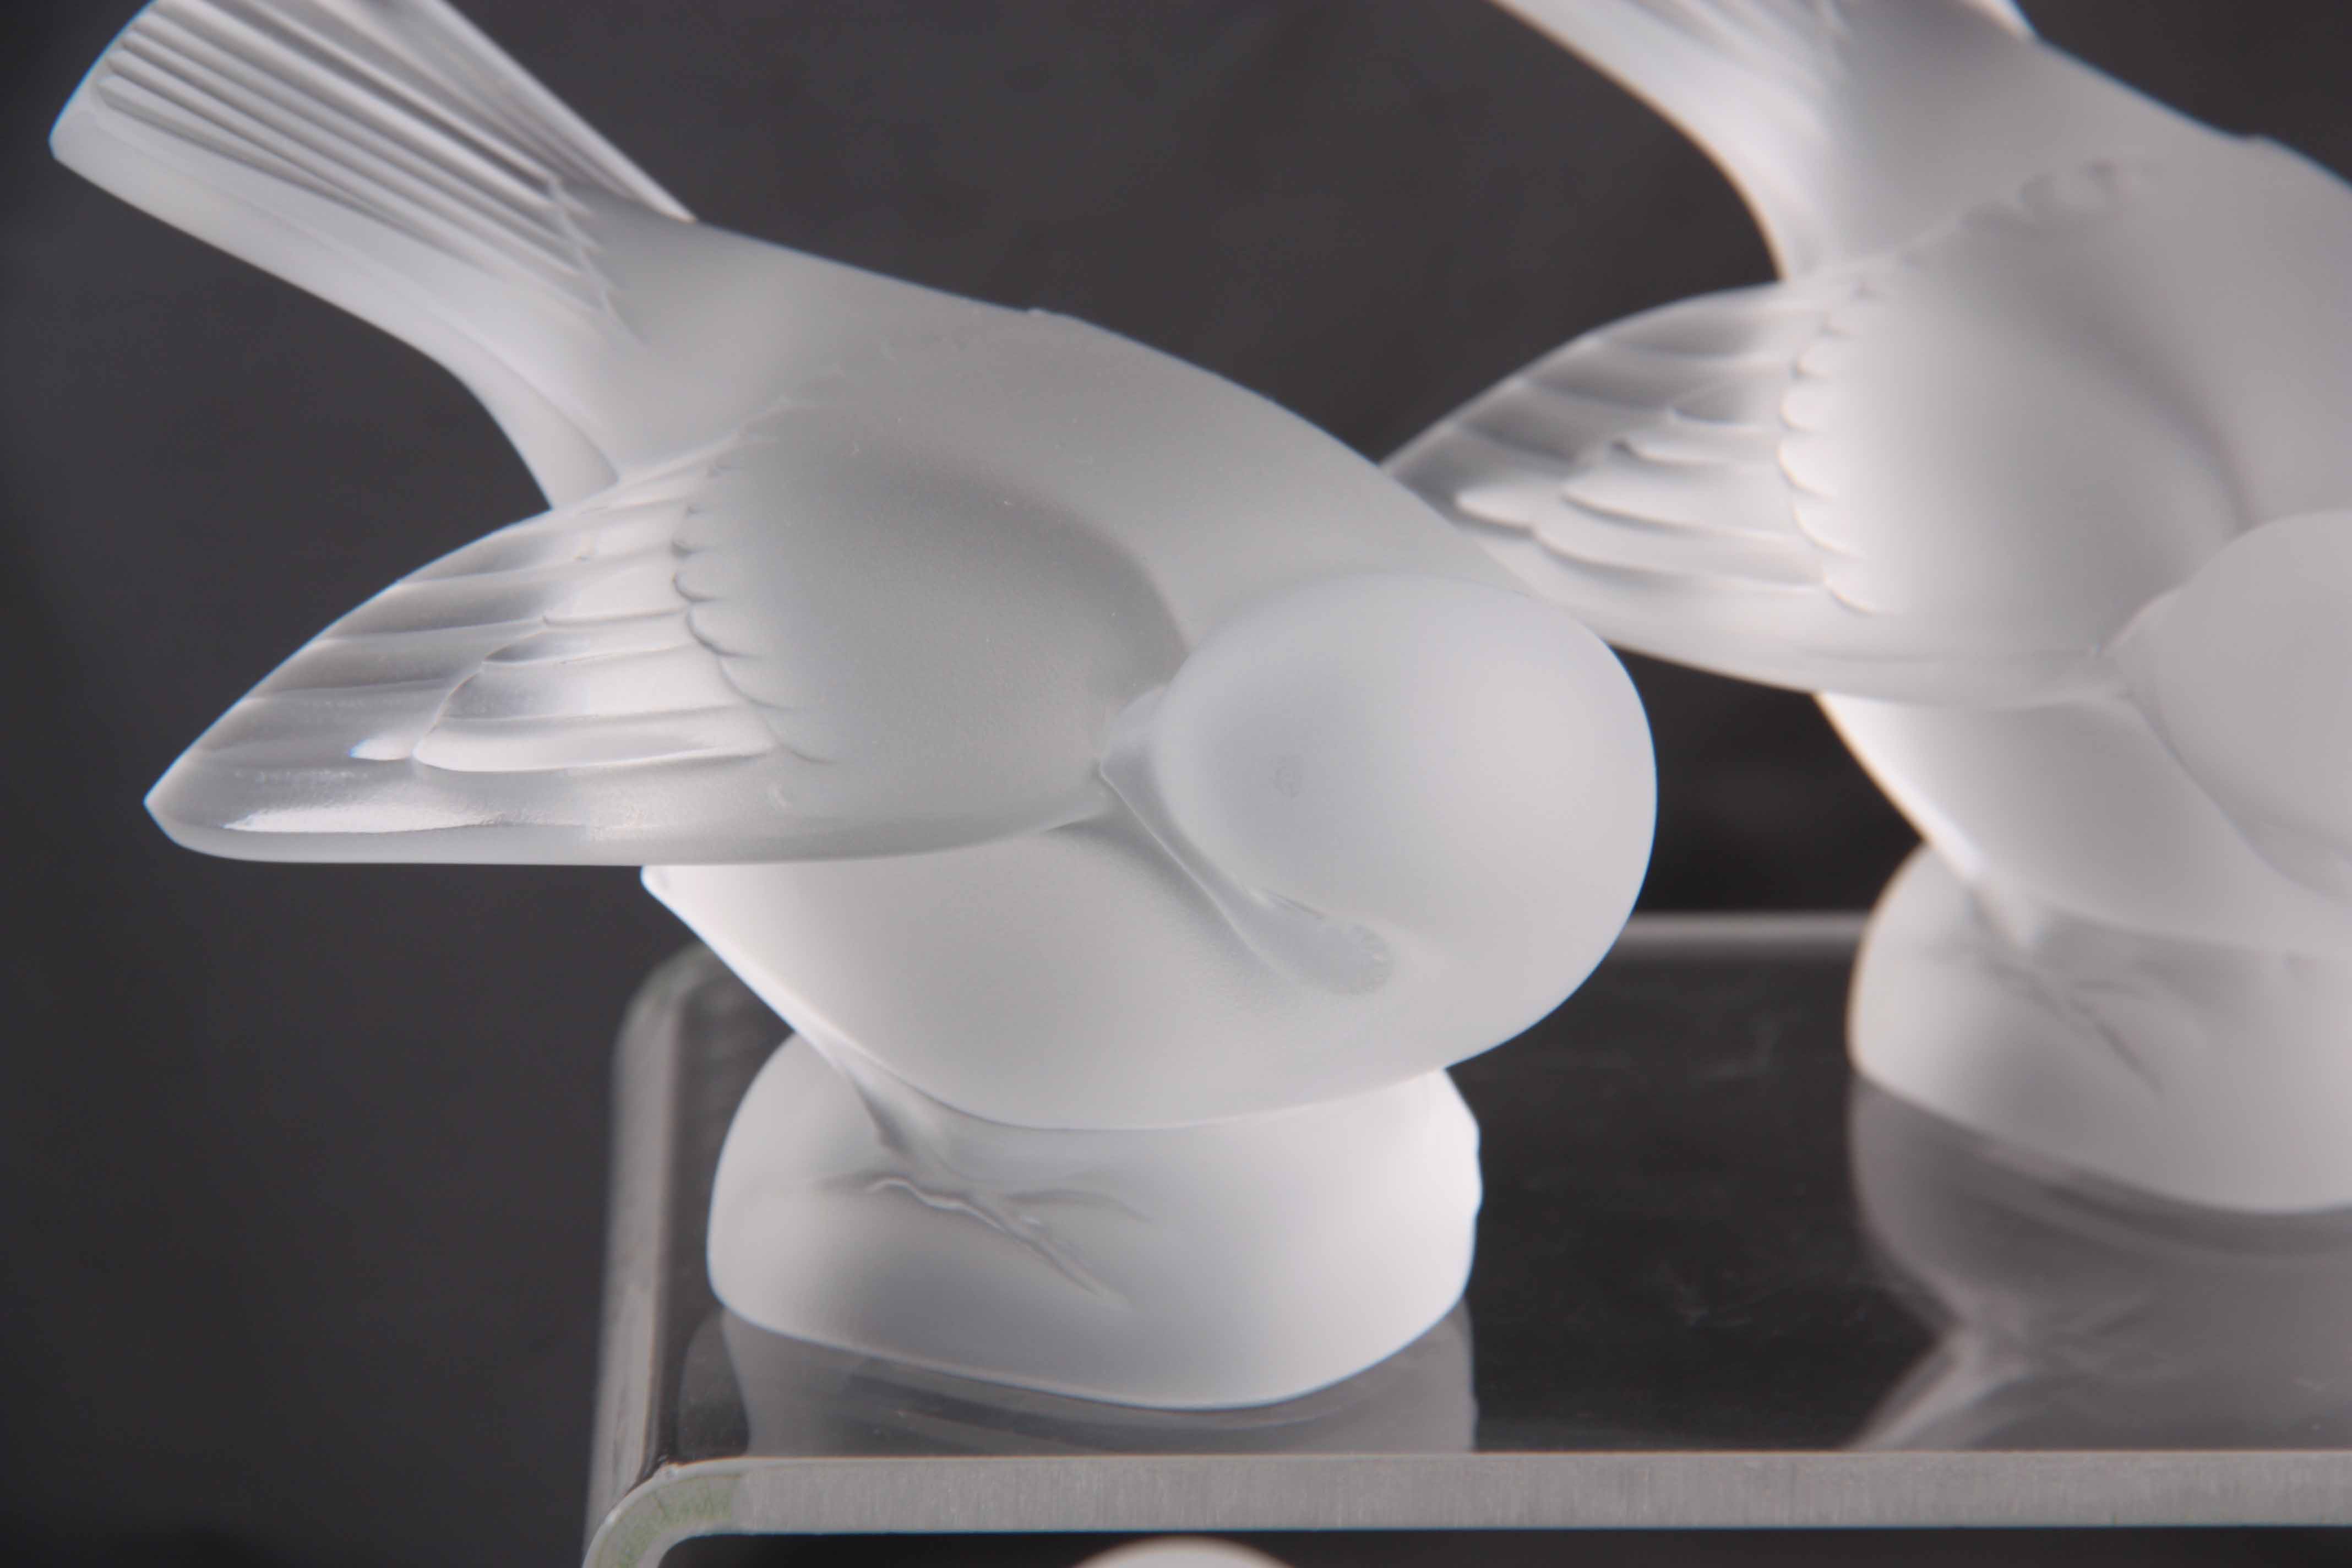 LALIQUE FRANCE, A SET OF 8 FROSTED GLASS SPARROWS - signed Lalique France 8cm high. - Image 3 of 11